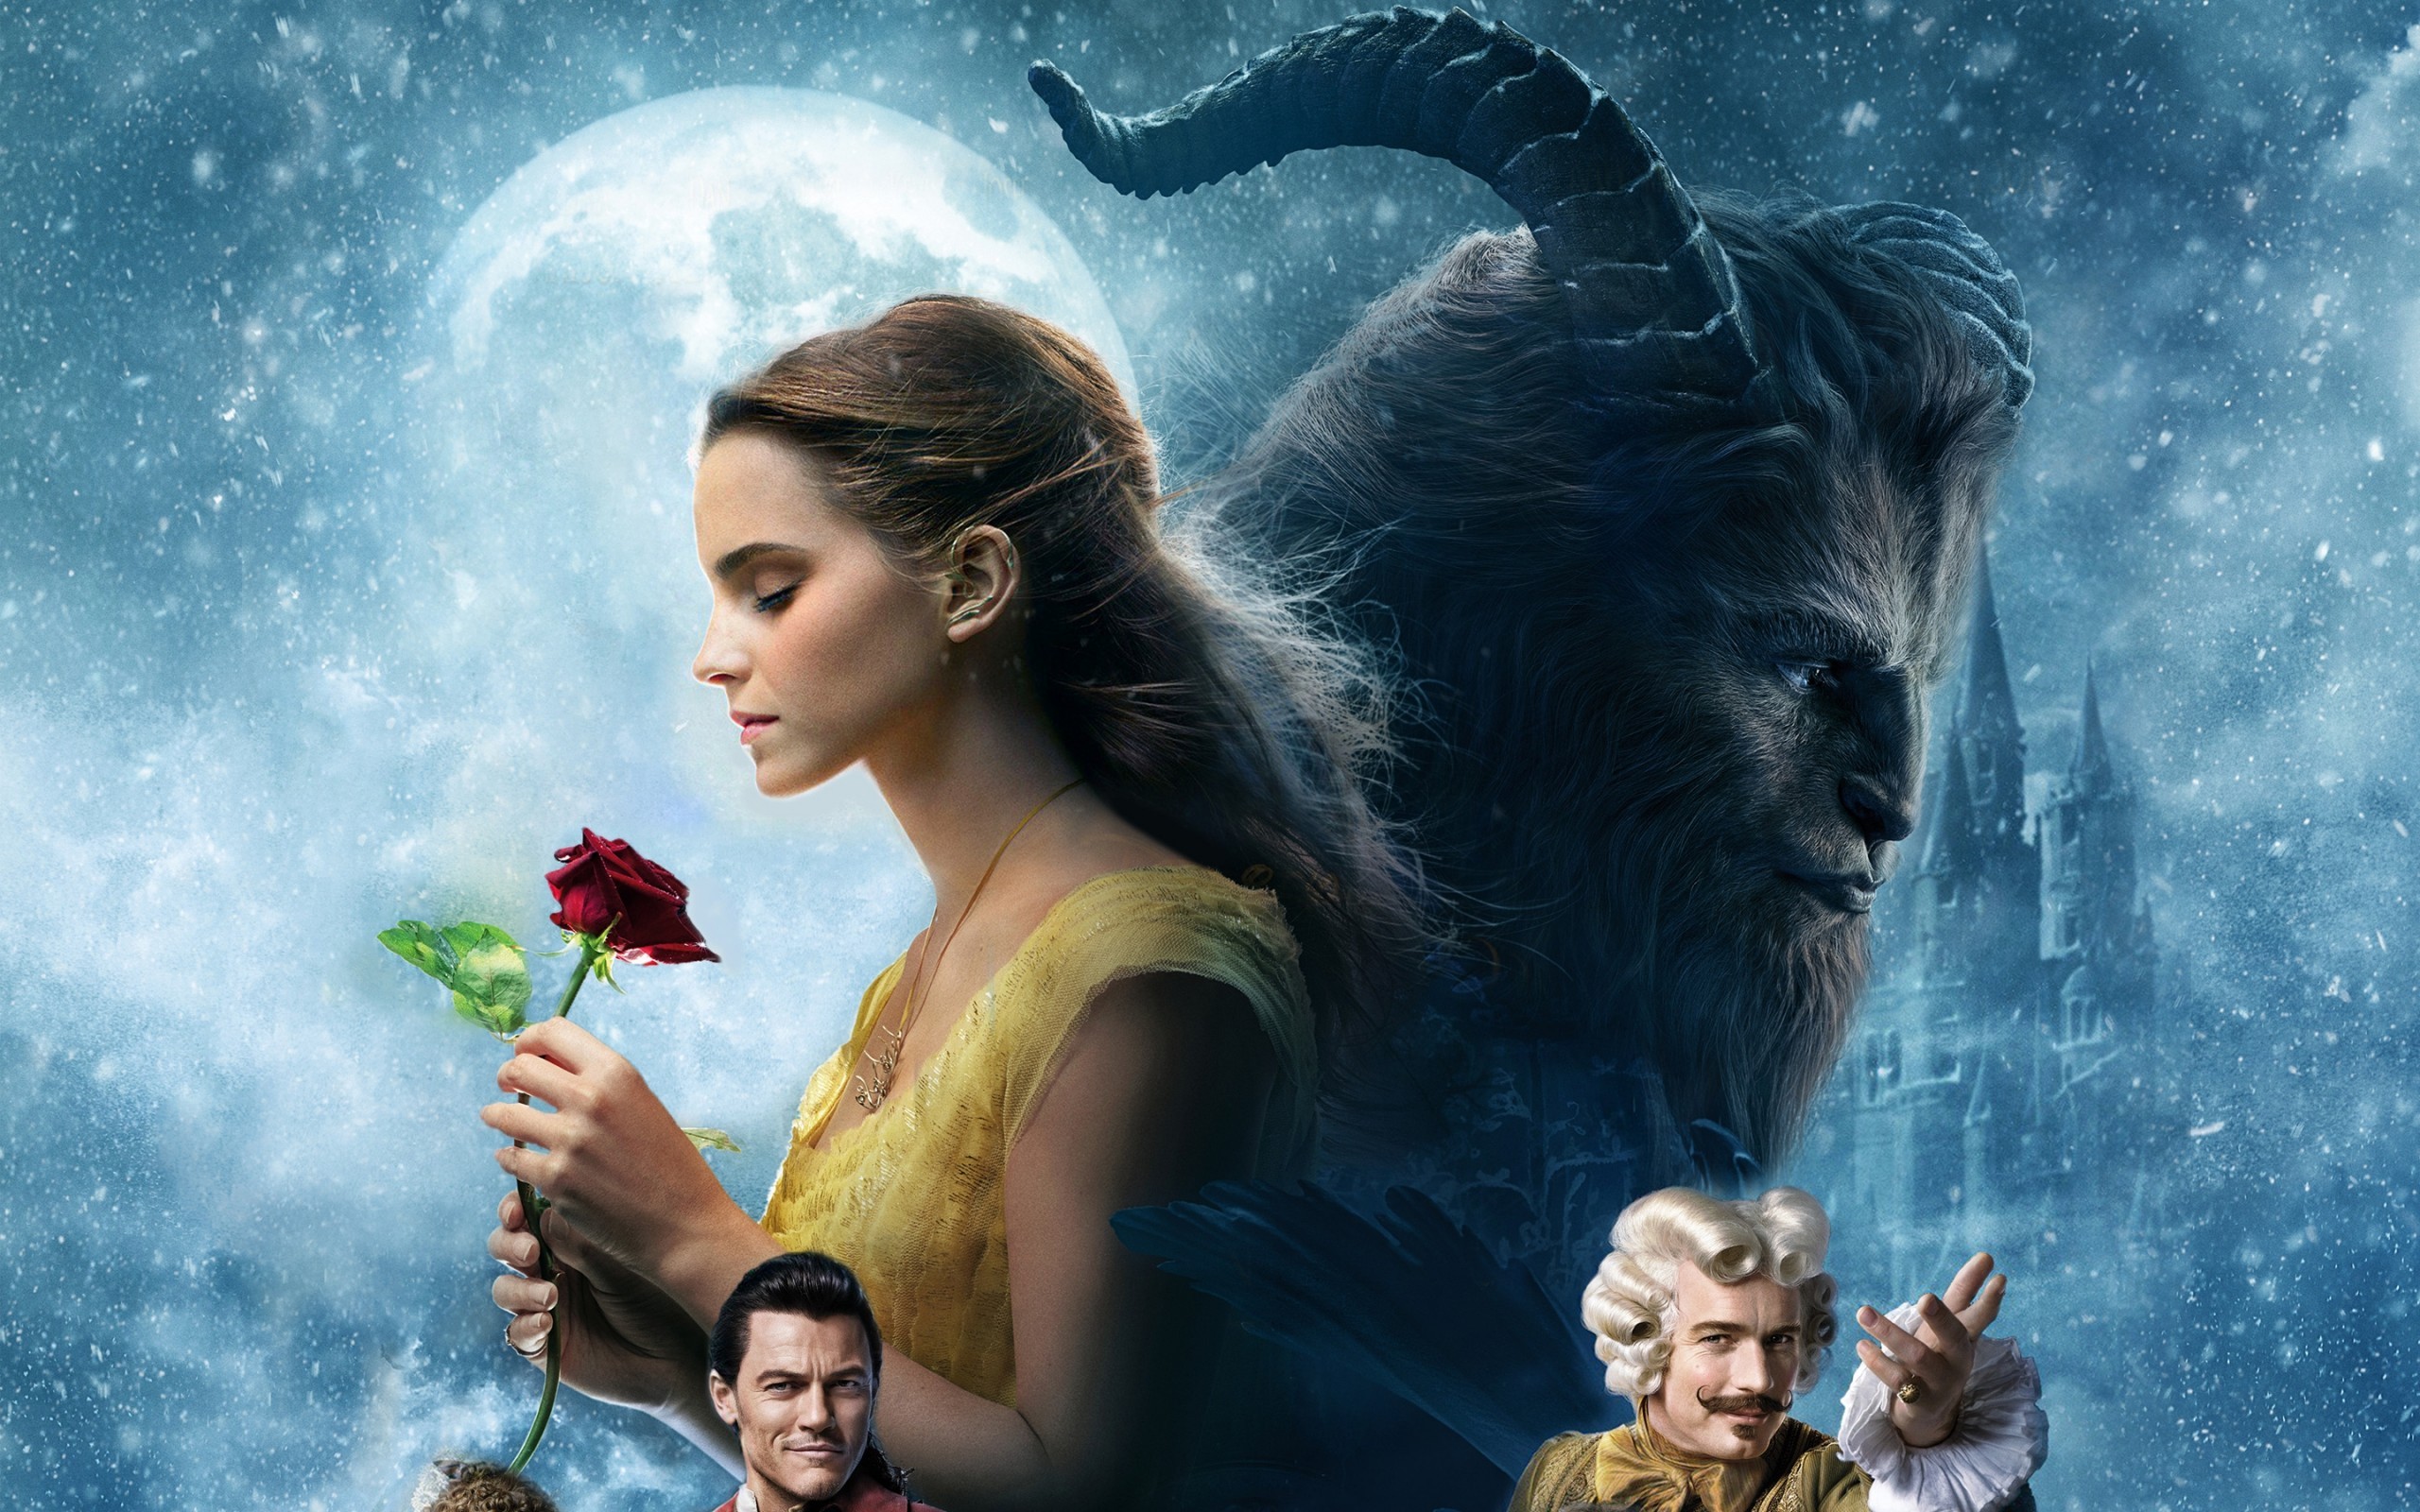 Beauth And The Beast, Emma Watson, Dan Stevens - Characters In Beauty And The Beast 2017 - HD Wallpaper 